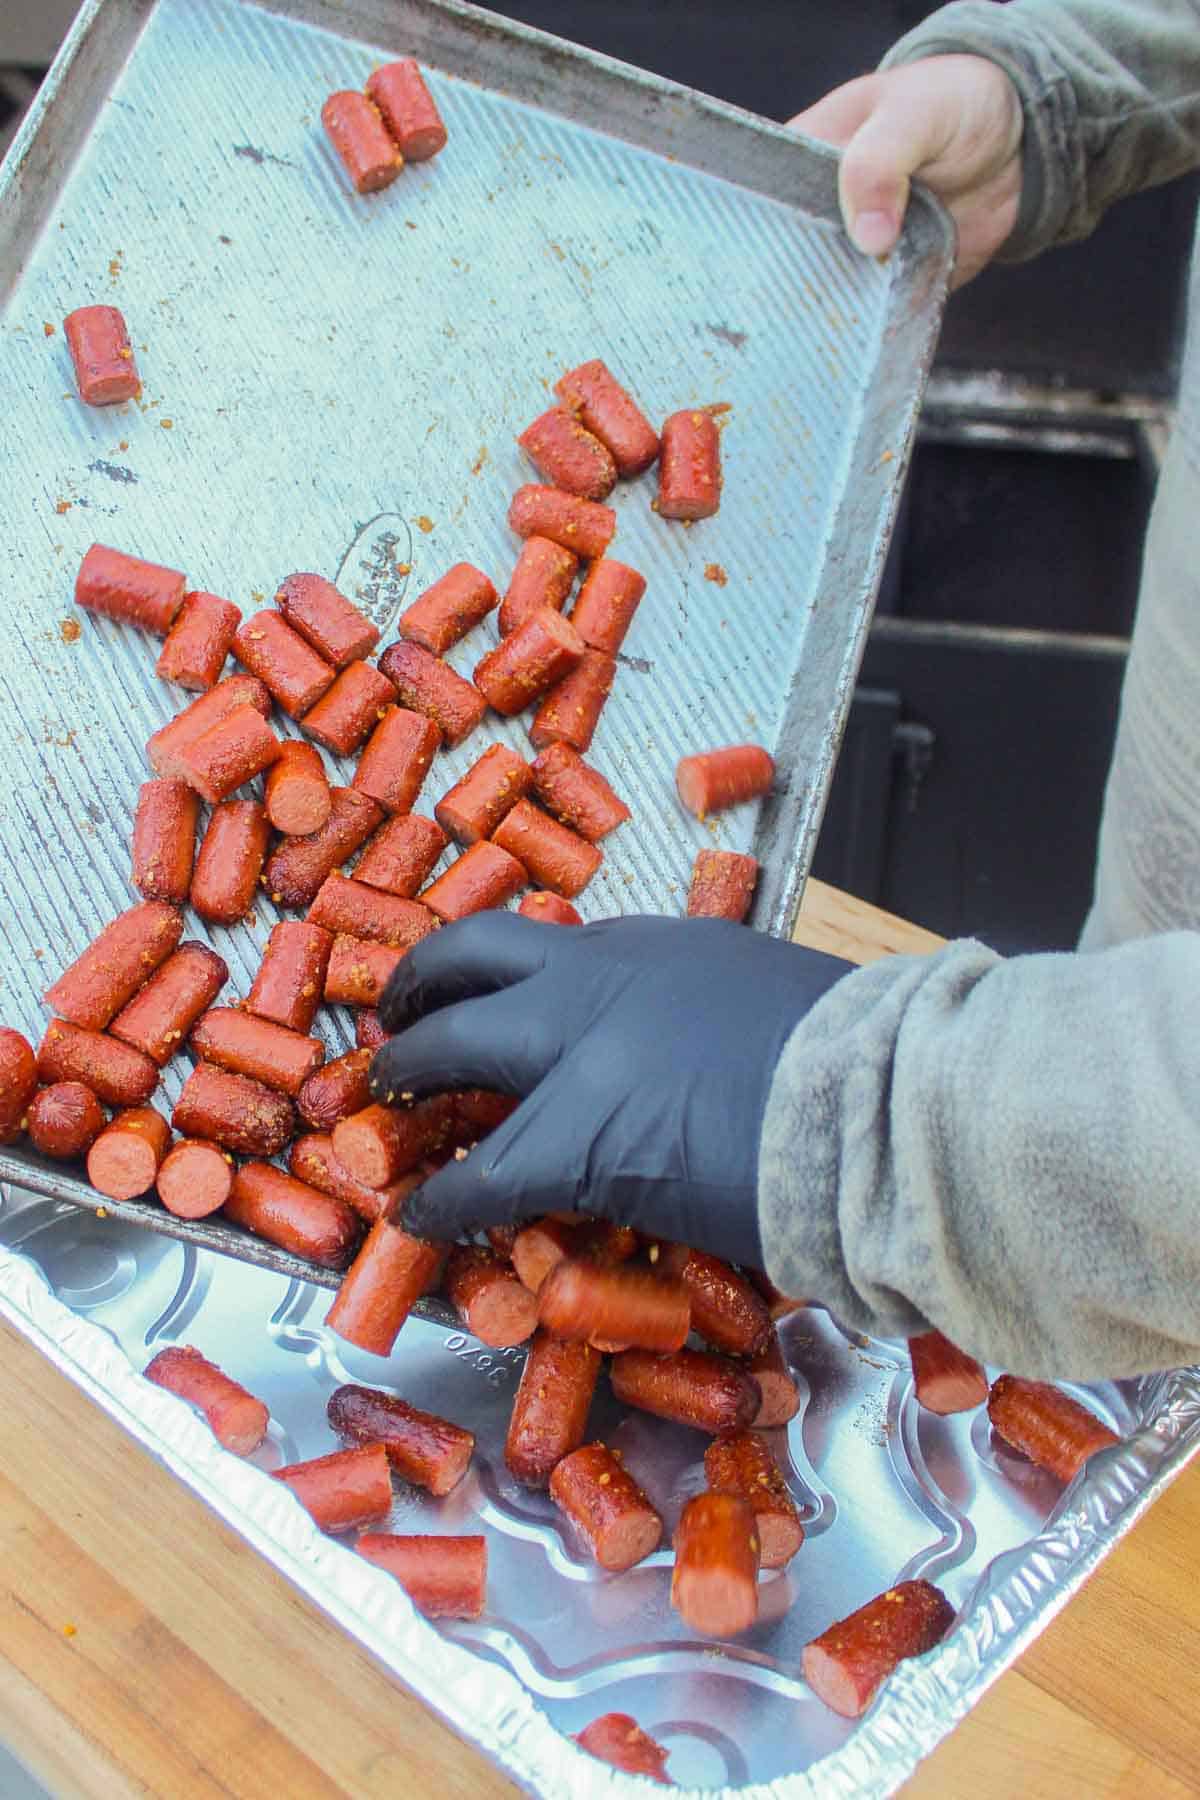 Hot dogs getting poured into an aluminum pan.